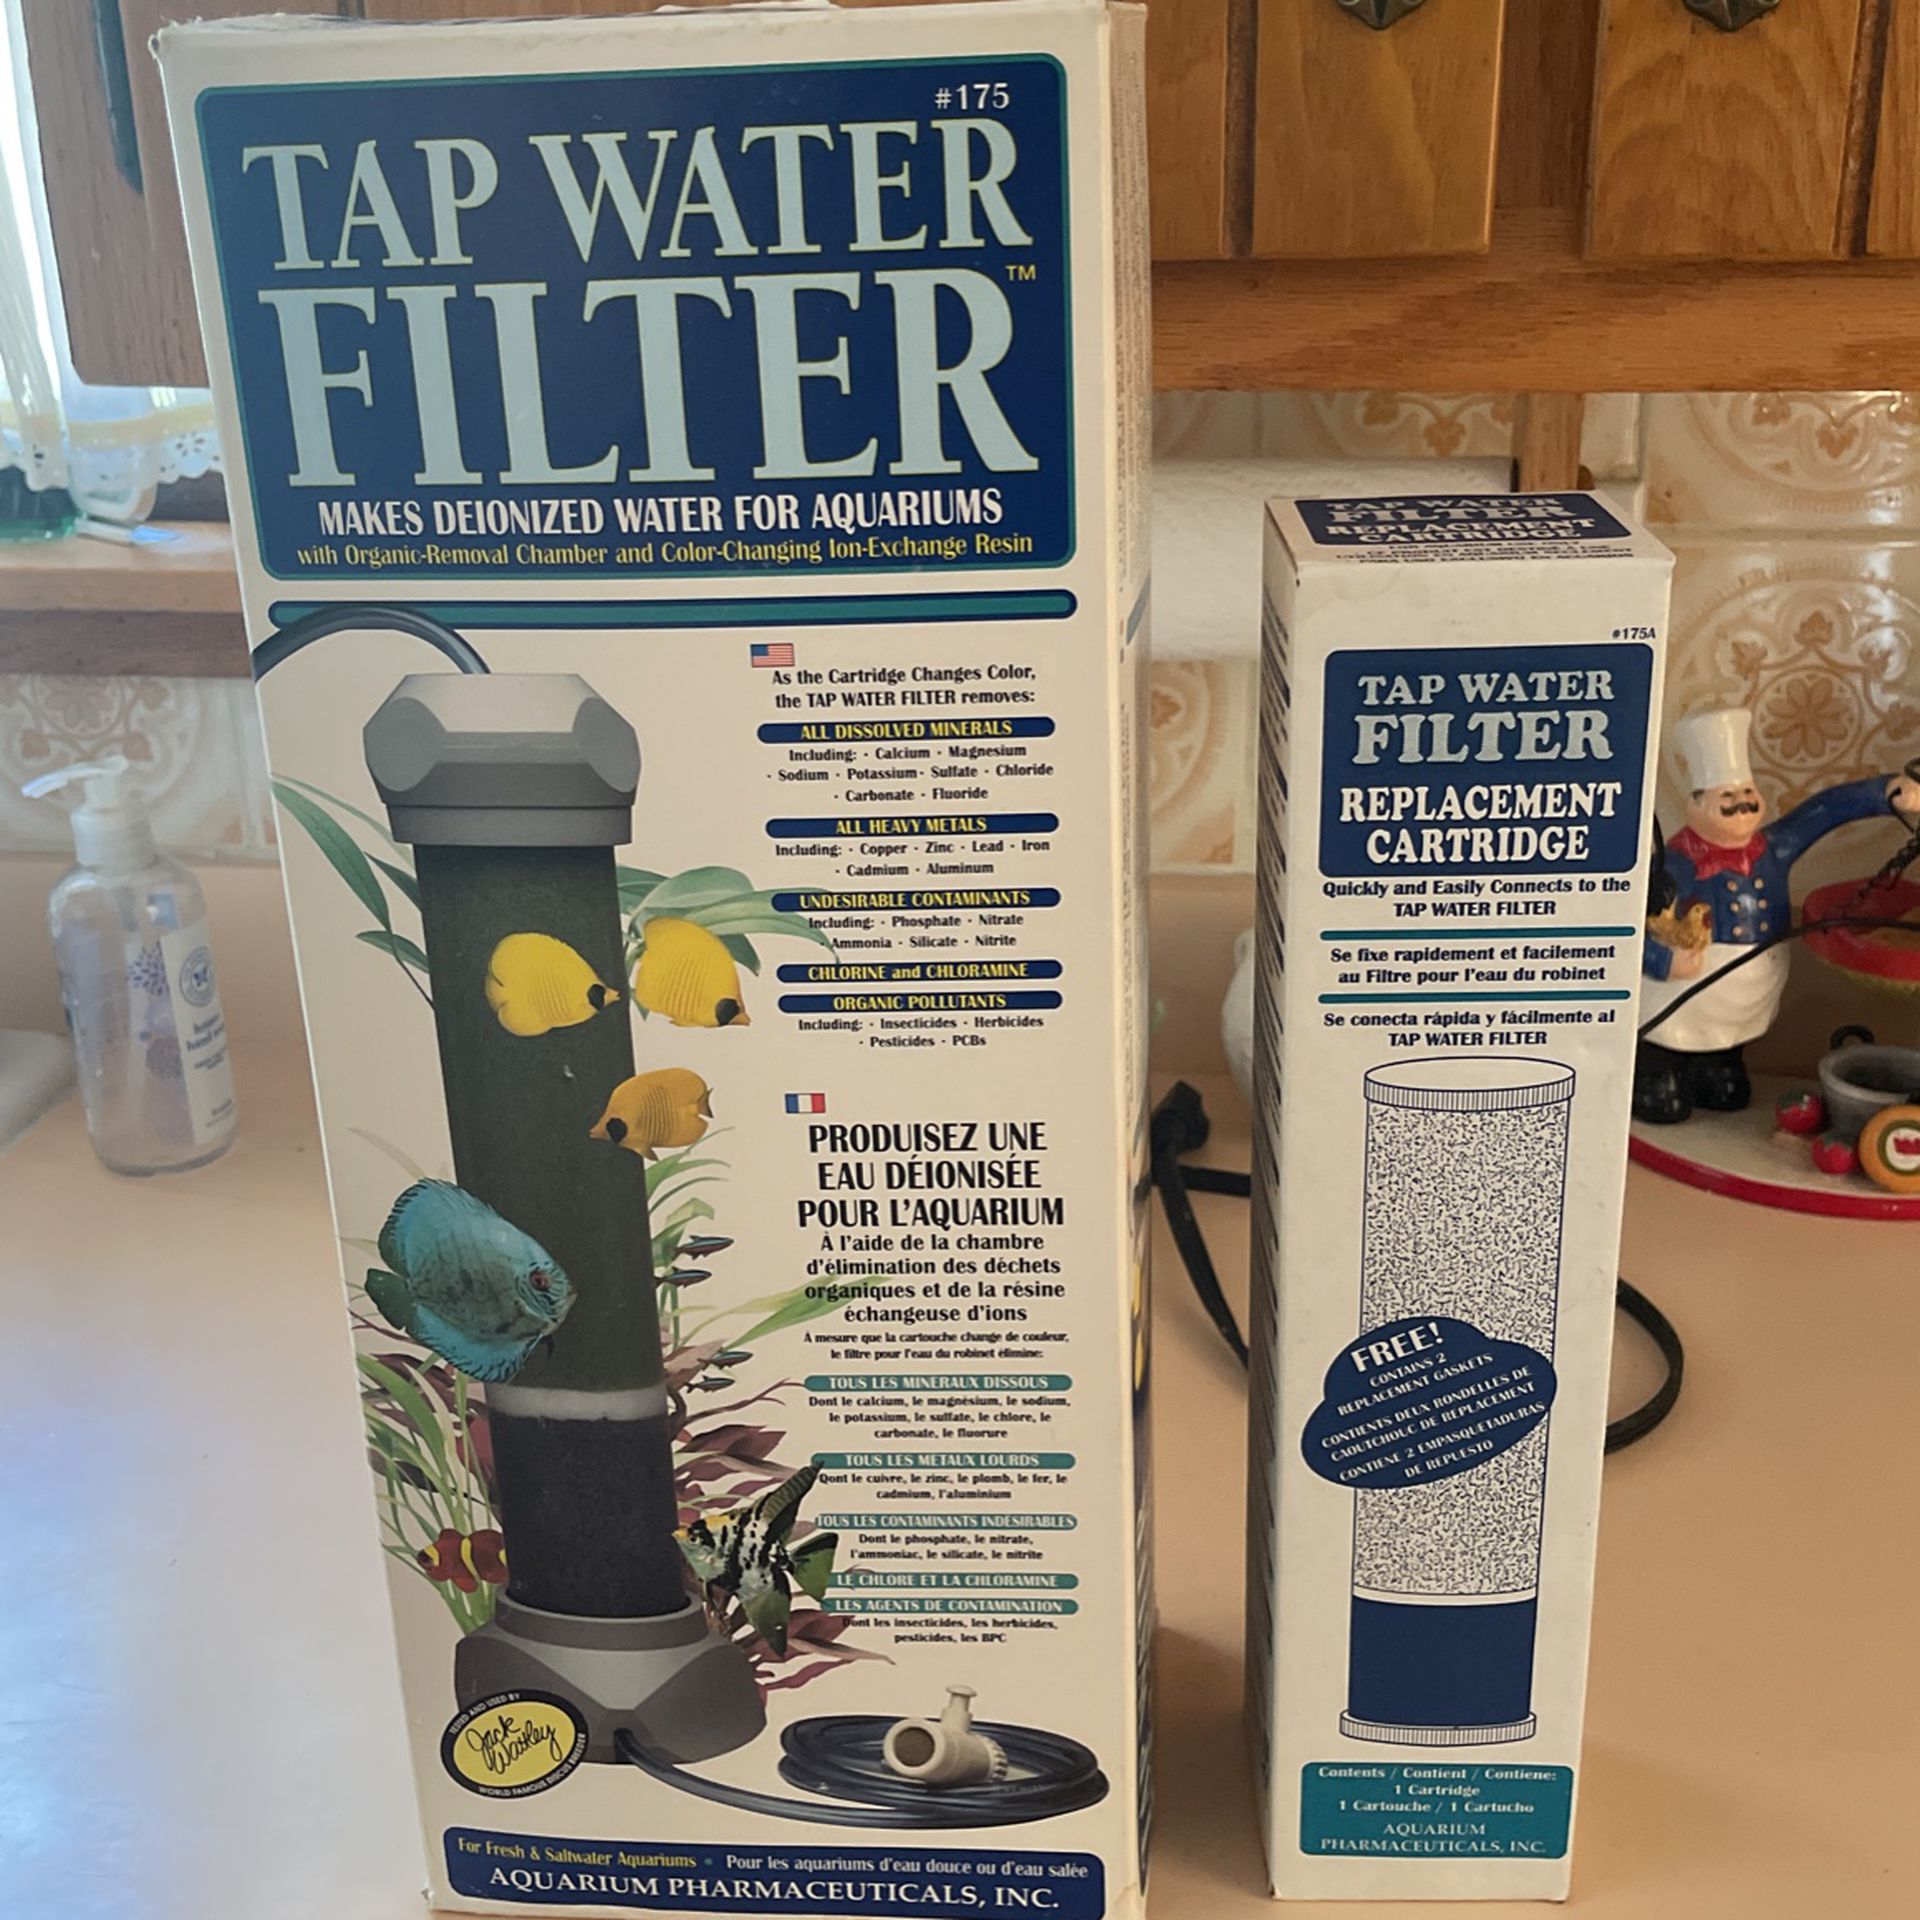 Tap Water Filter With Replacement Cartridge , Still In Box Never Used . For Aquariums .